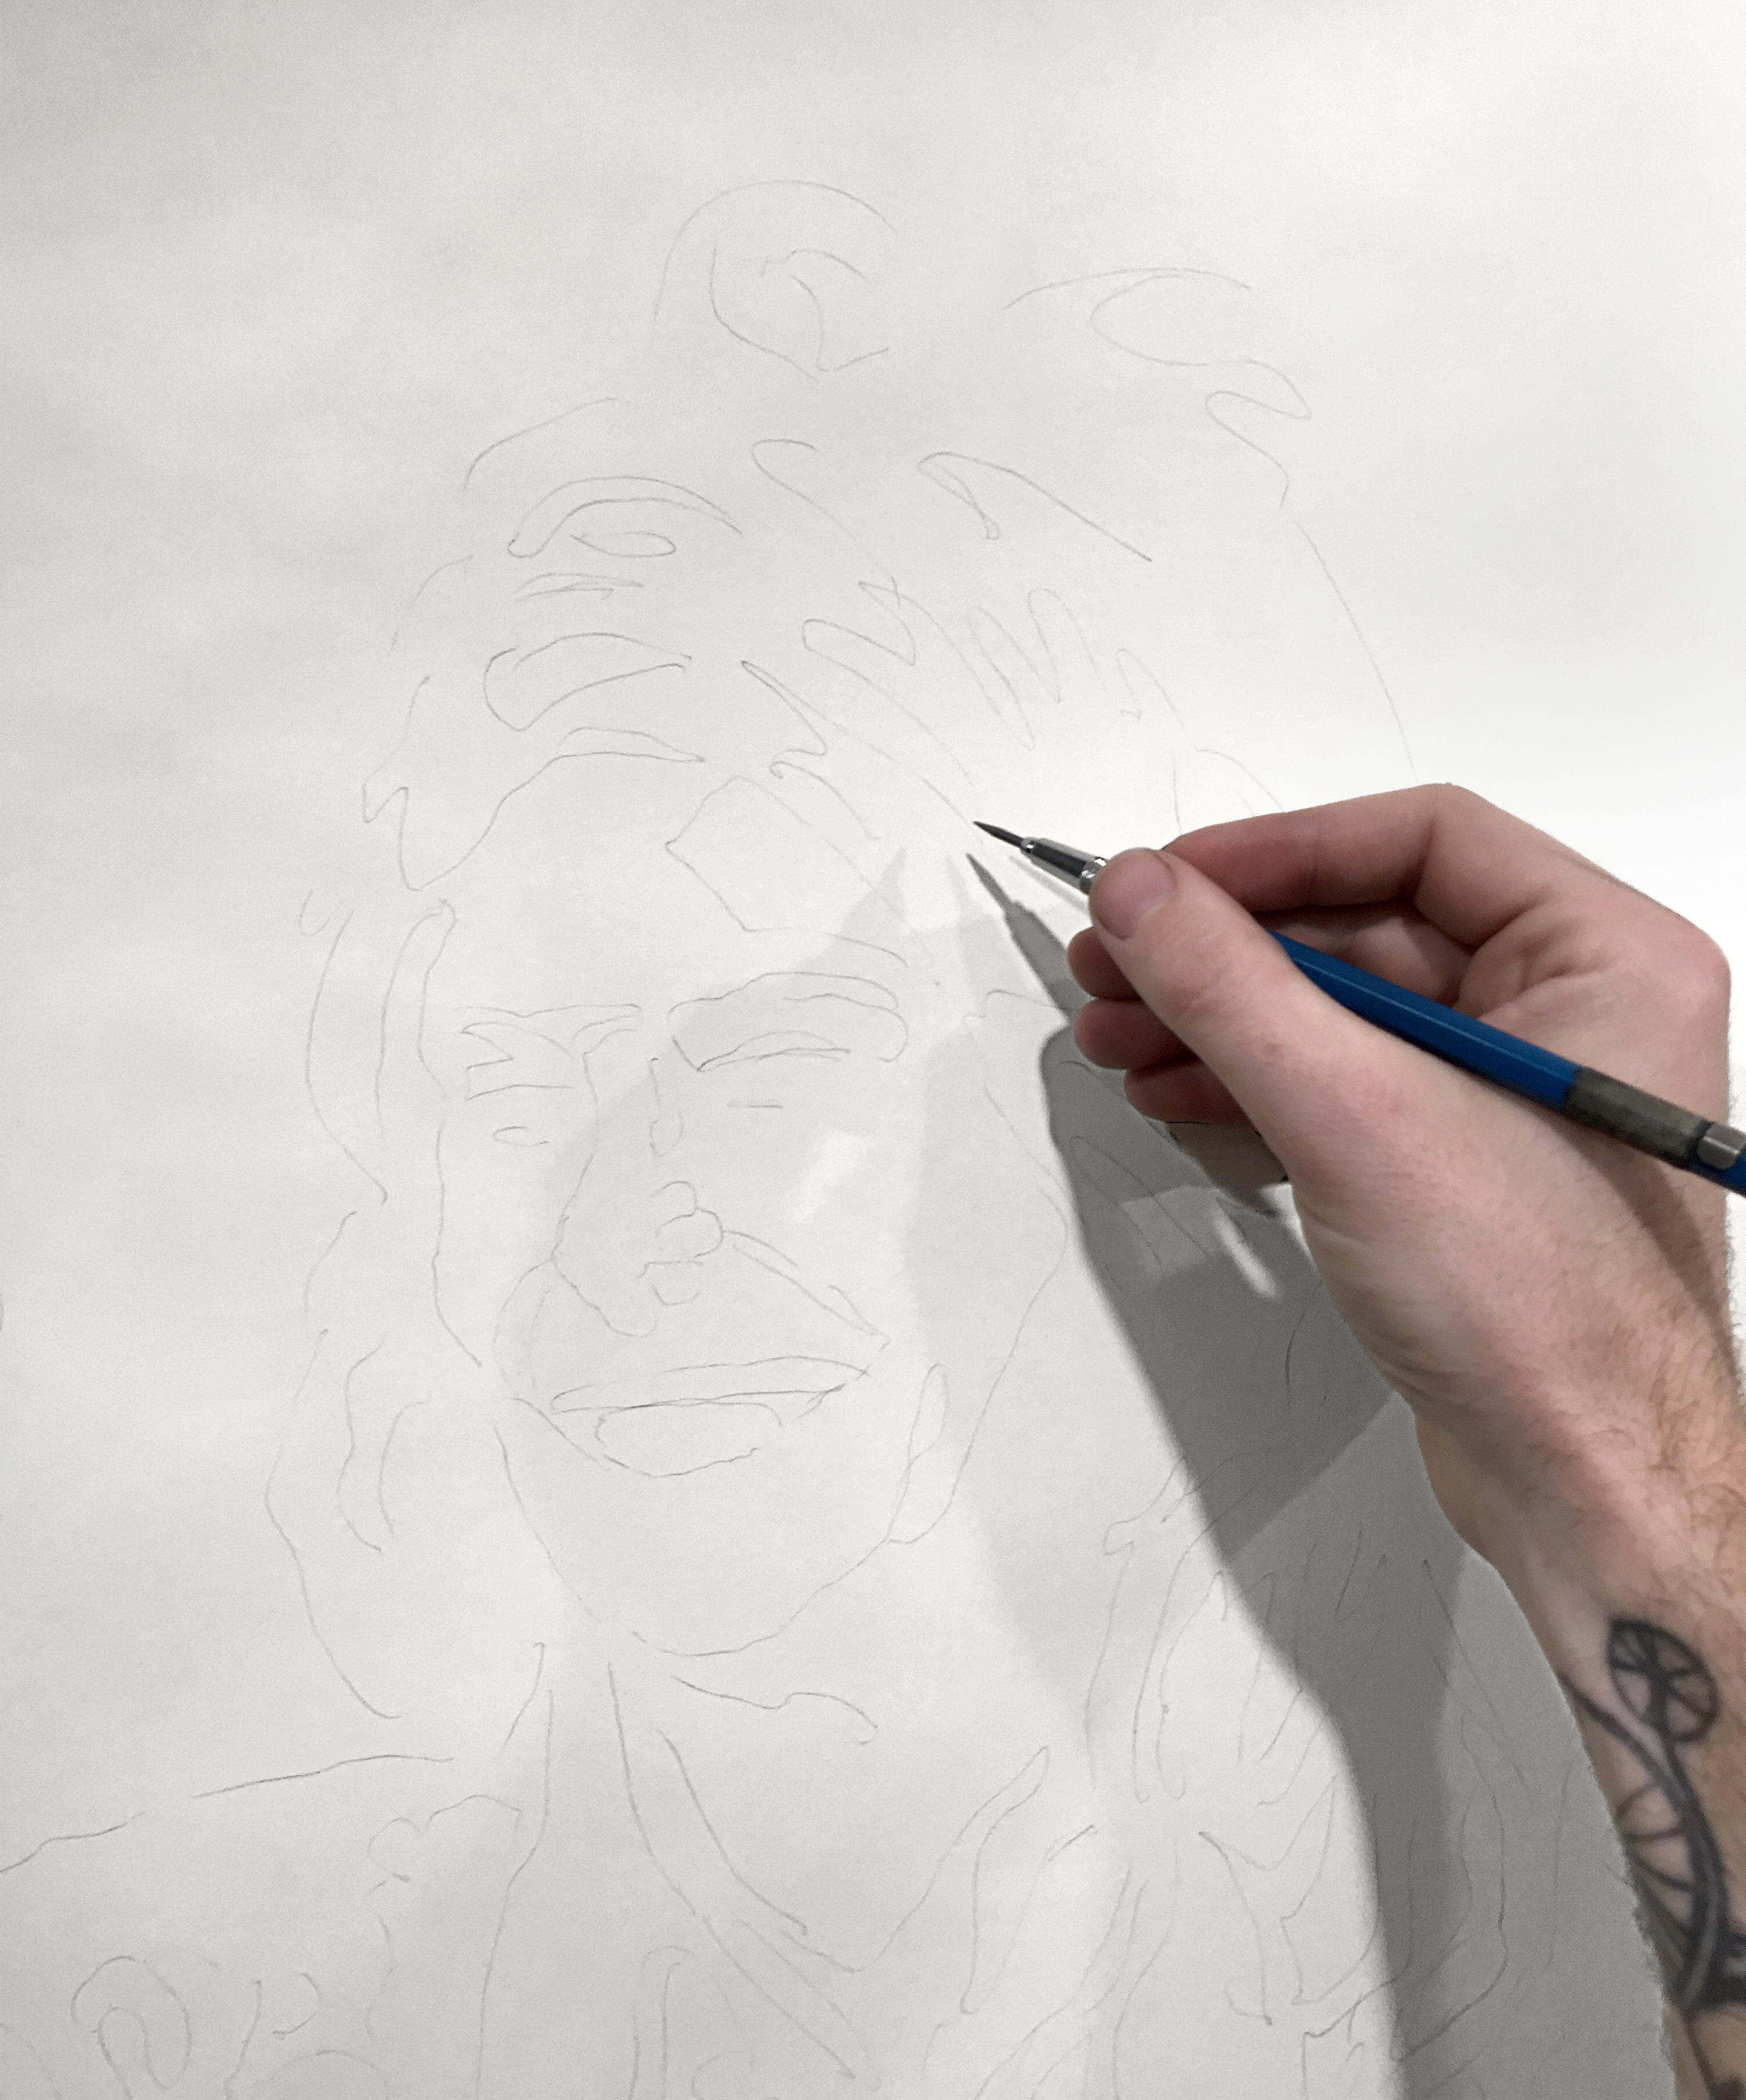 Underdrawing techniques